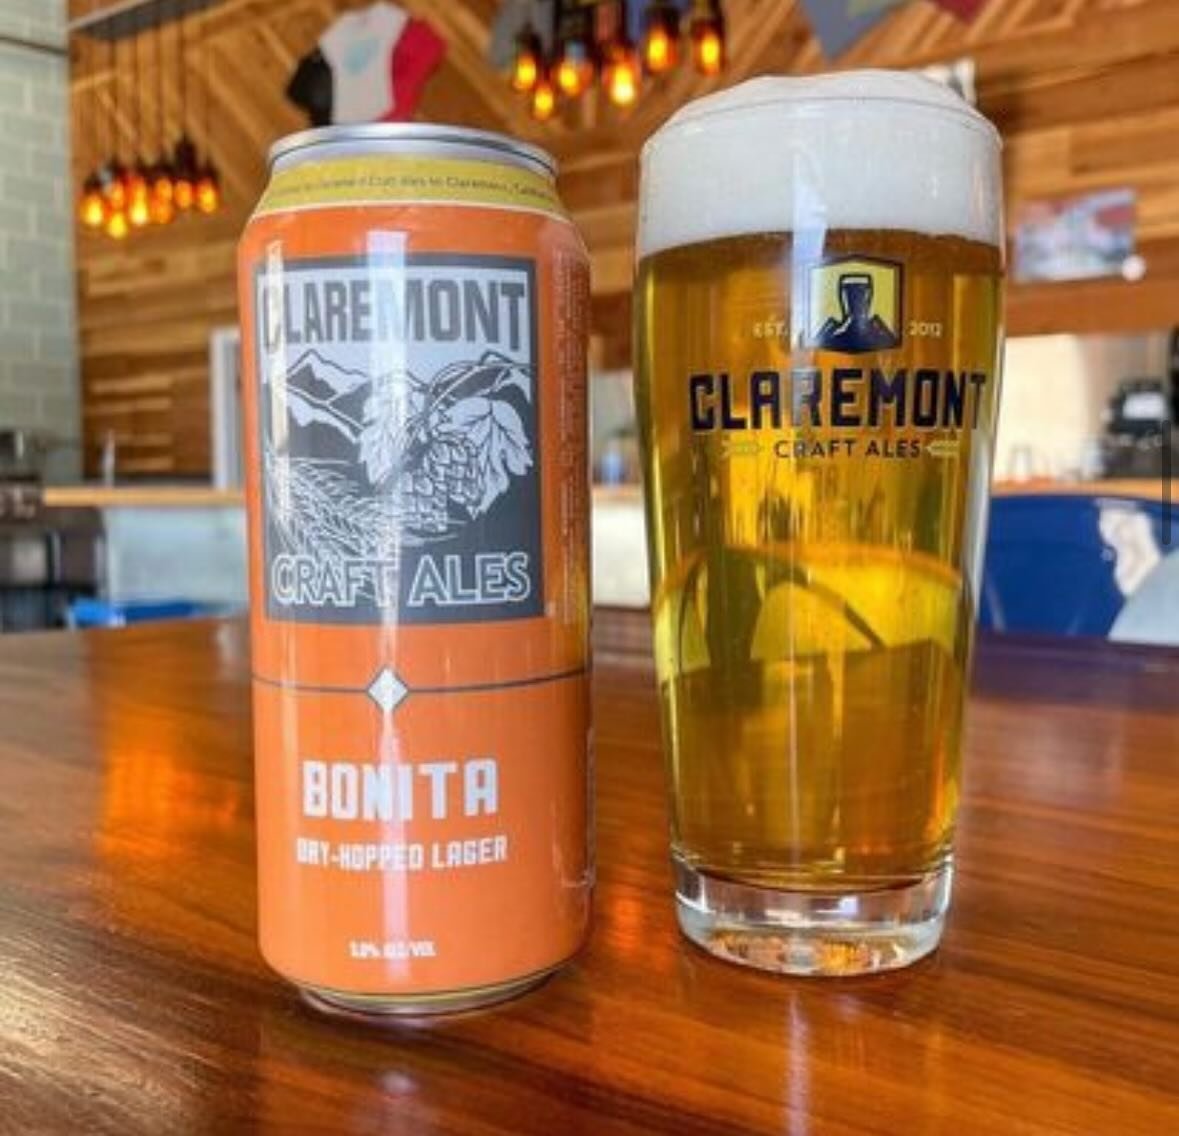 Bonita is tasting mighty fine on this beautiful day. Come on over for a refreshing pint and take a 4-pack home. 

We&rsquo;re open from 1pm-10pm. We&rsquo;re excited to have @thetropictruck back serving their delicious food. See you soon!

#claremont